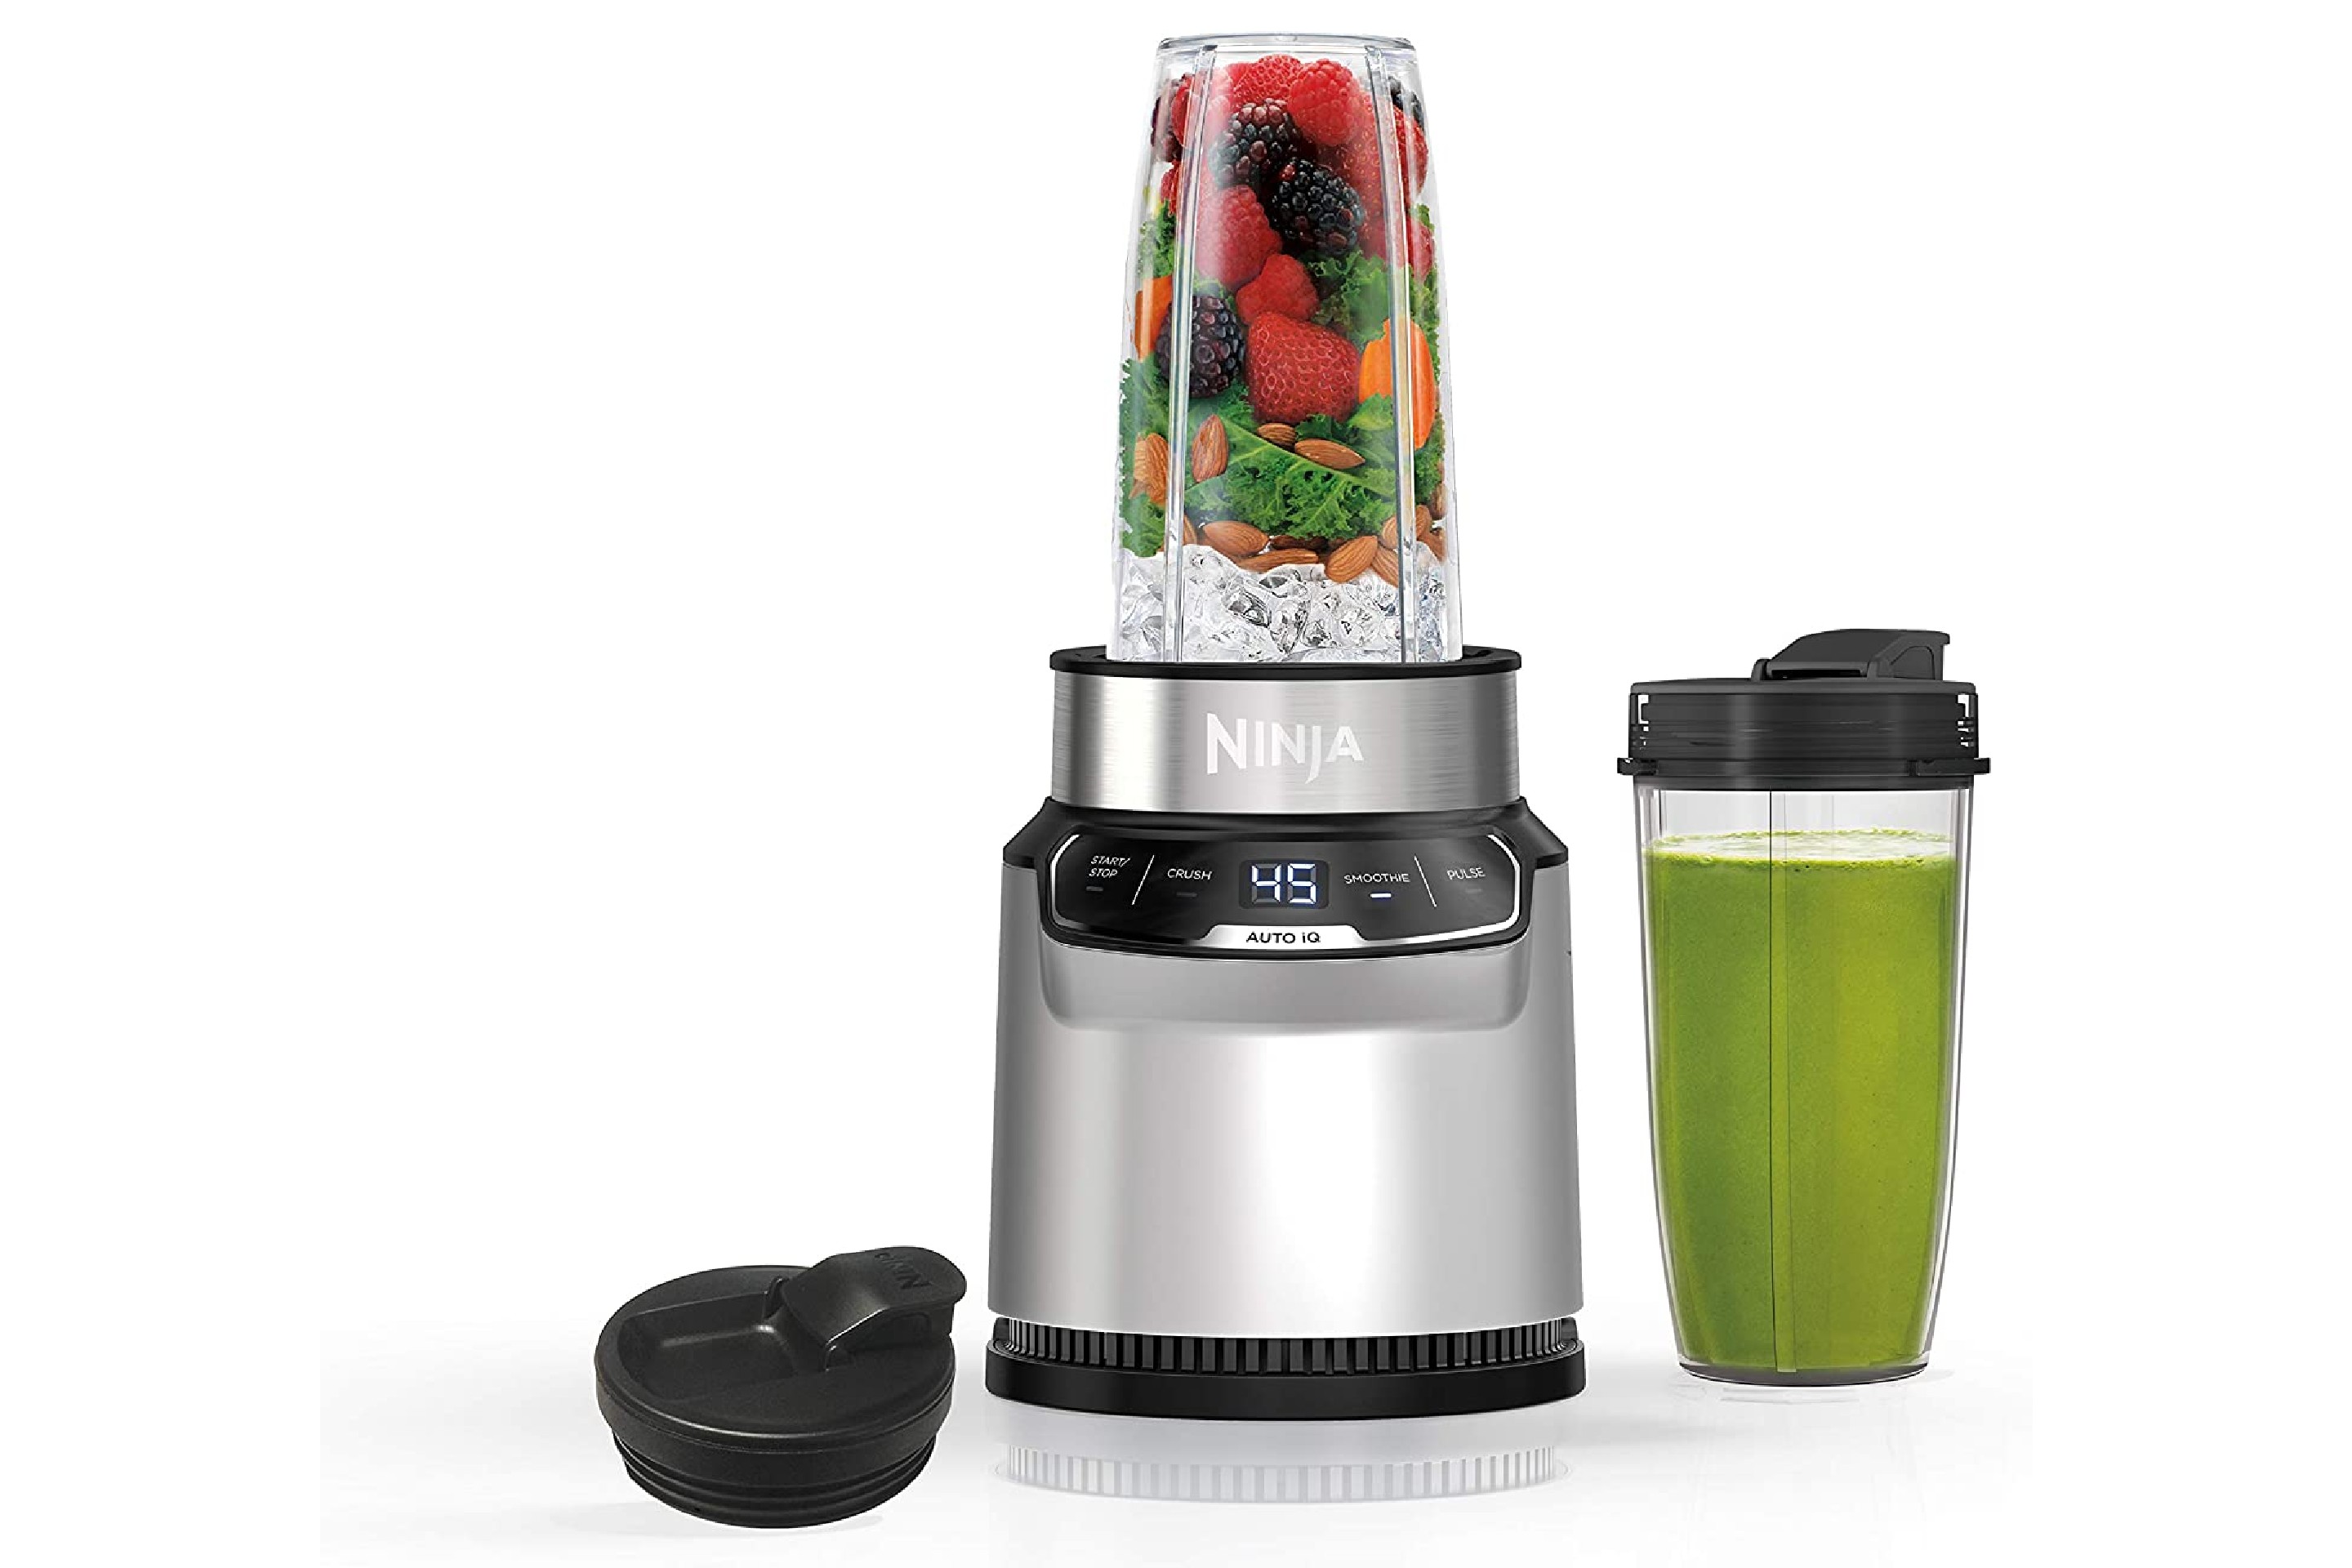 Portable Smoothie Blender Cup